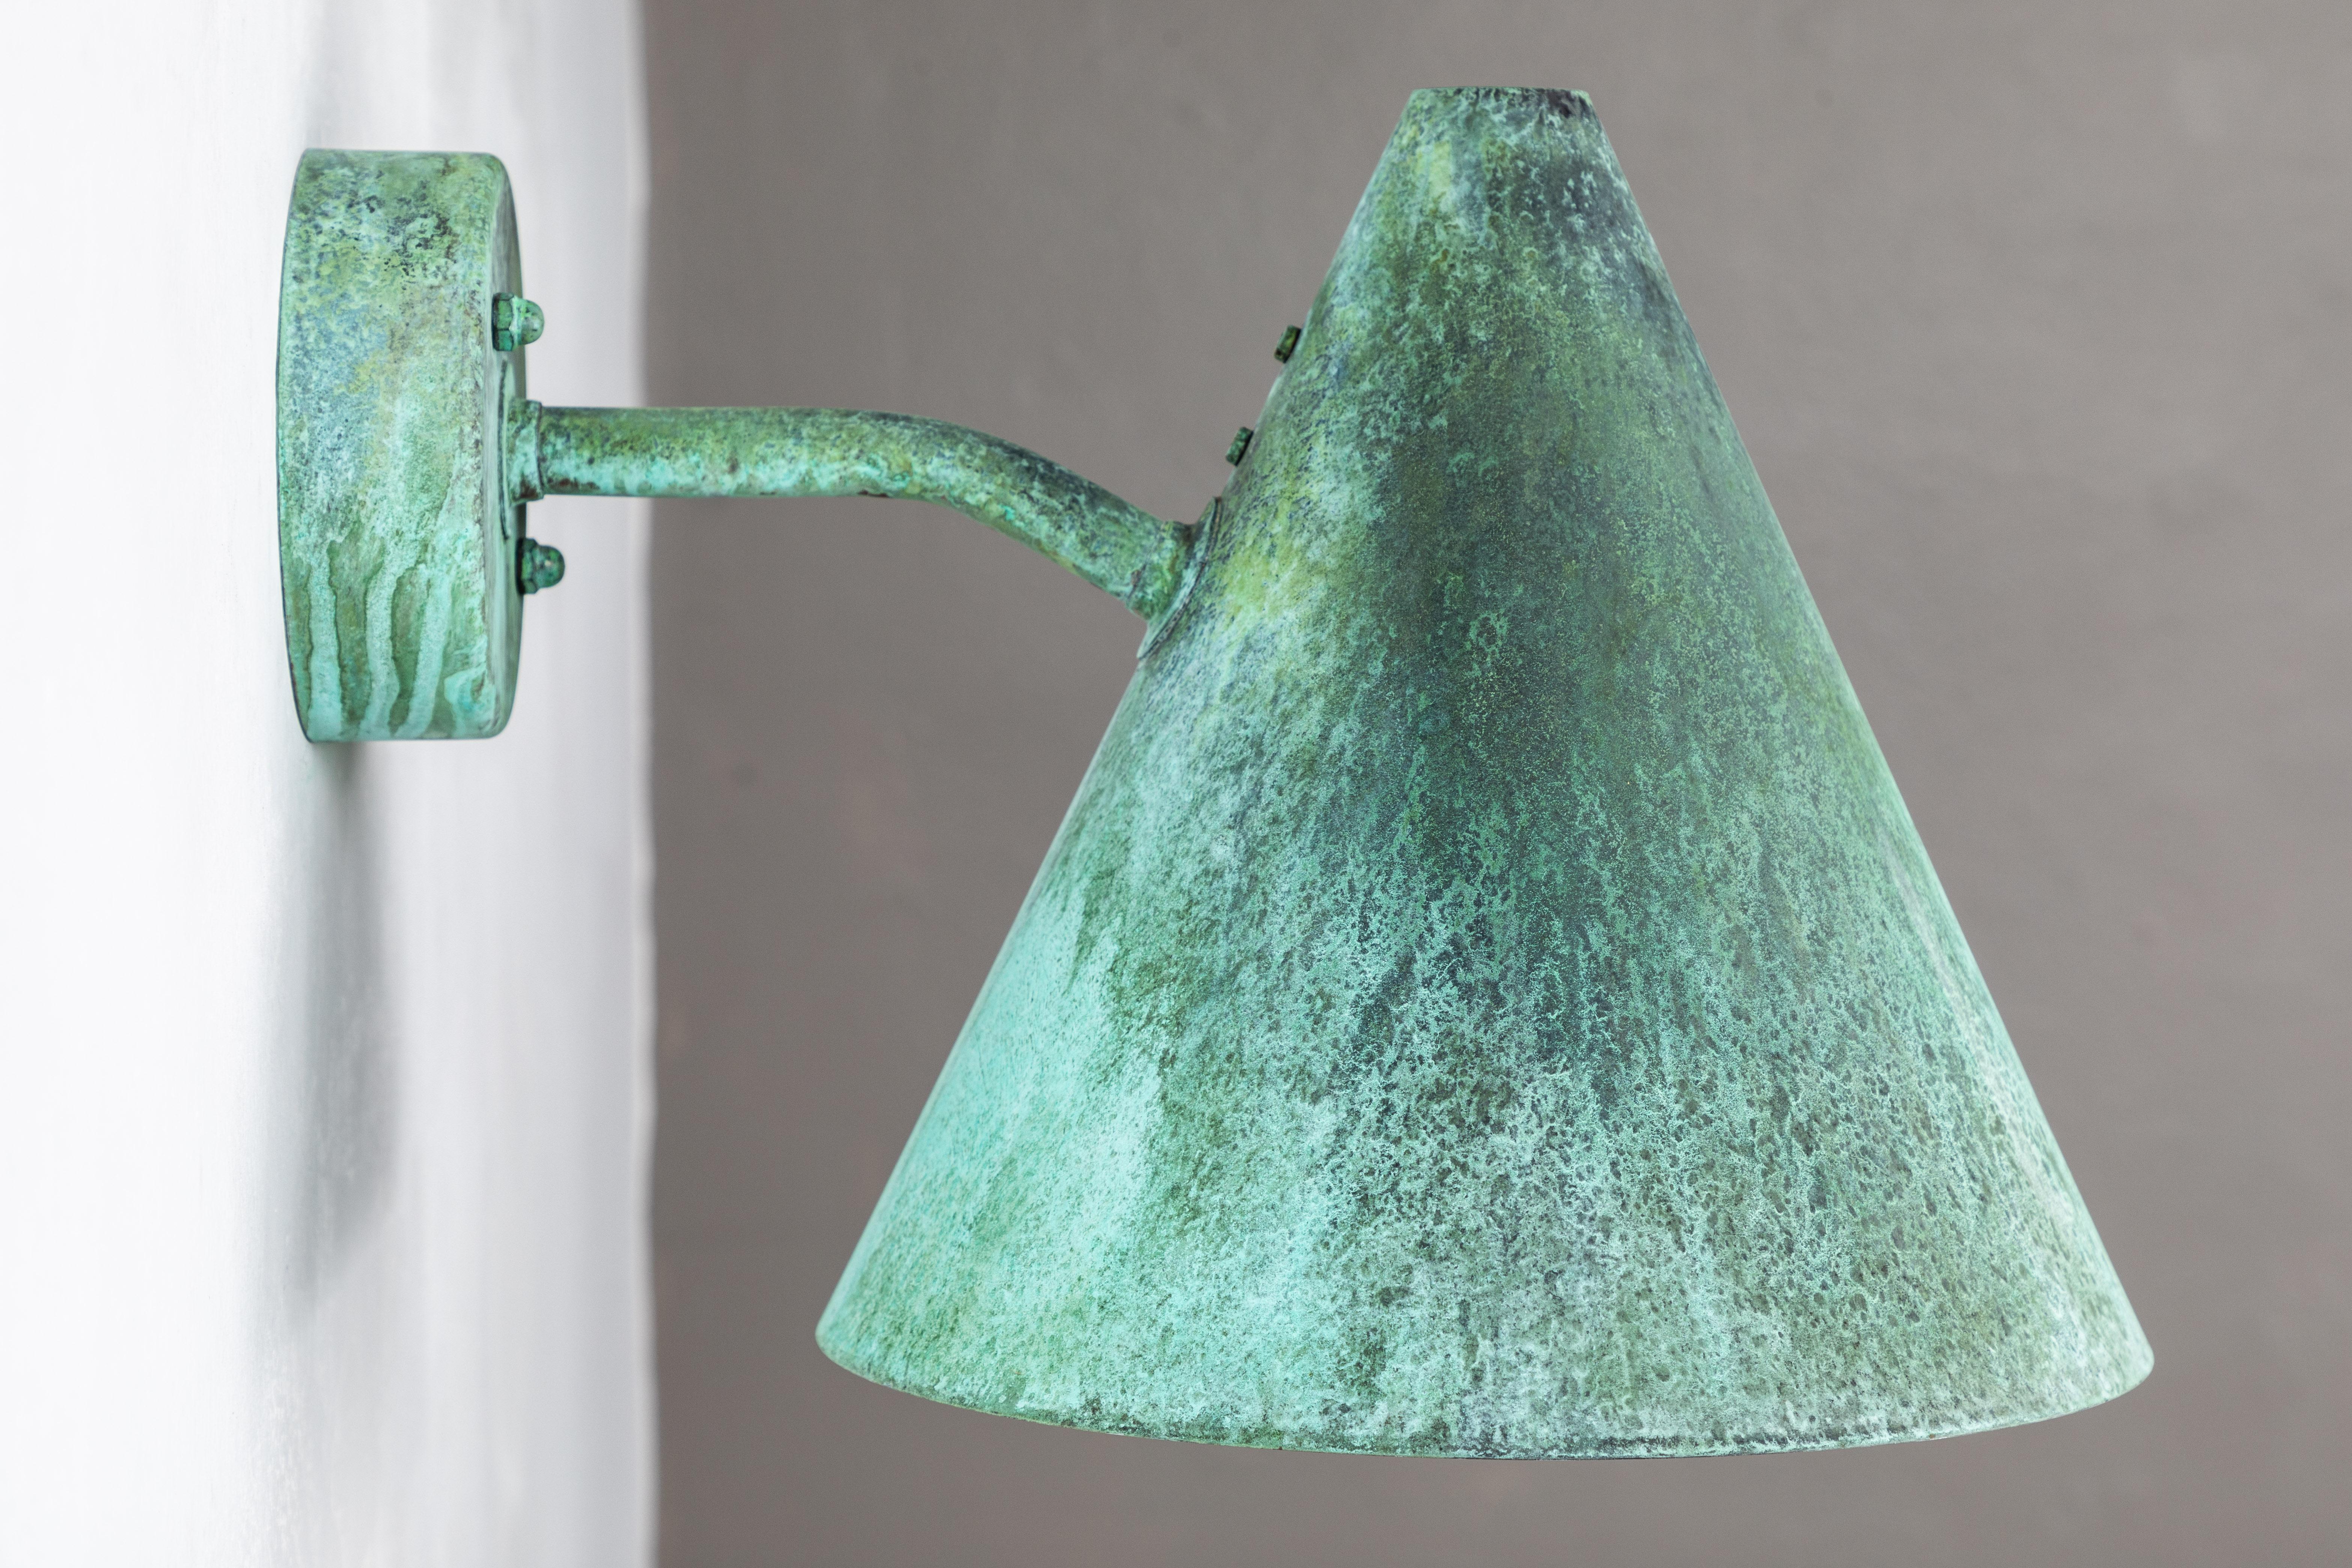 Hans-Agne Jakobsson 'Tratten' Verdigris Patinated Outdoor Sconce For Sale 6